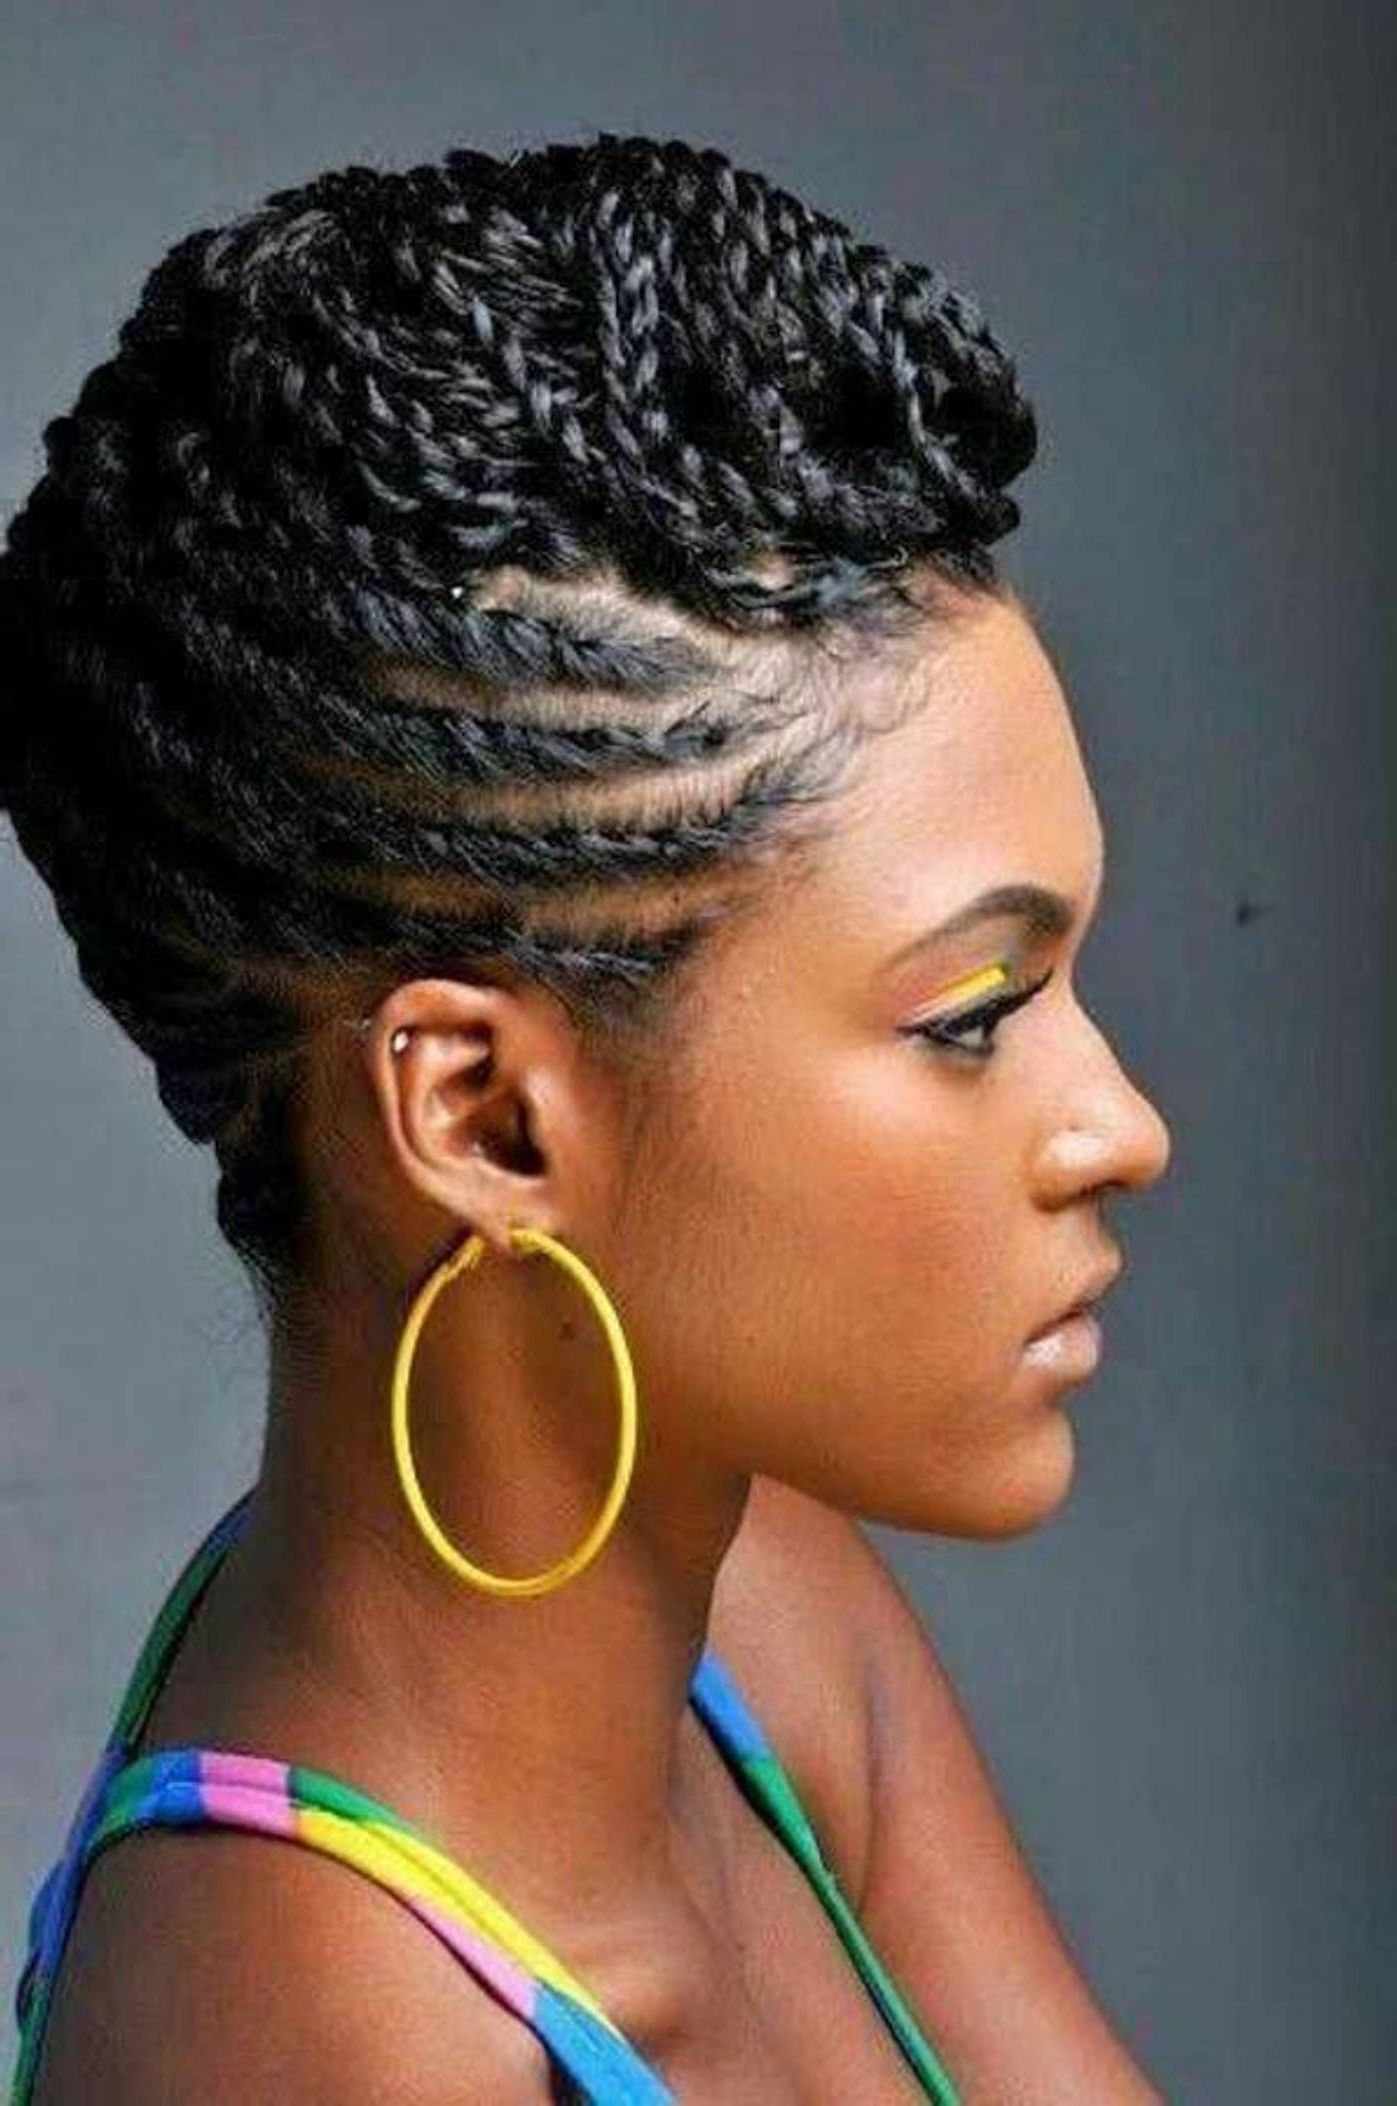 Best Updo Hairstyles For Black Women Flat Twist Picture Of Pertaining To Updo Hairstyles For Black Women With Natural Hair (View 6 of 15)